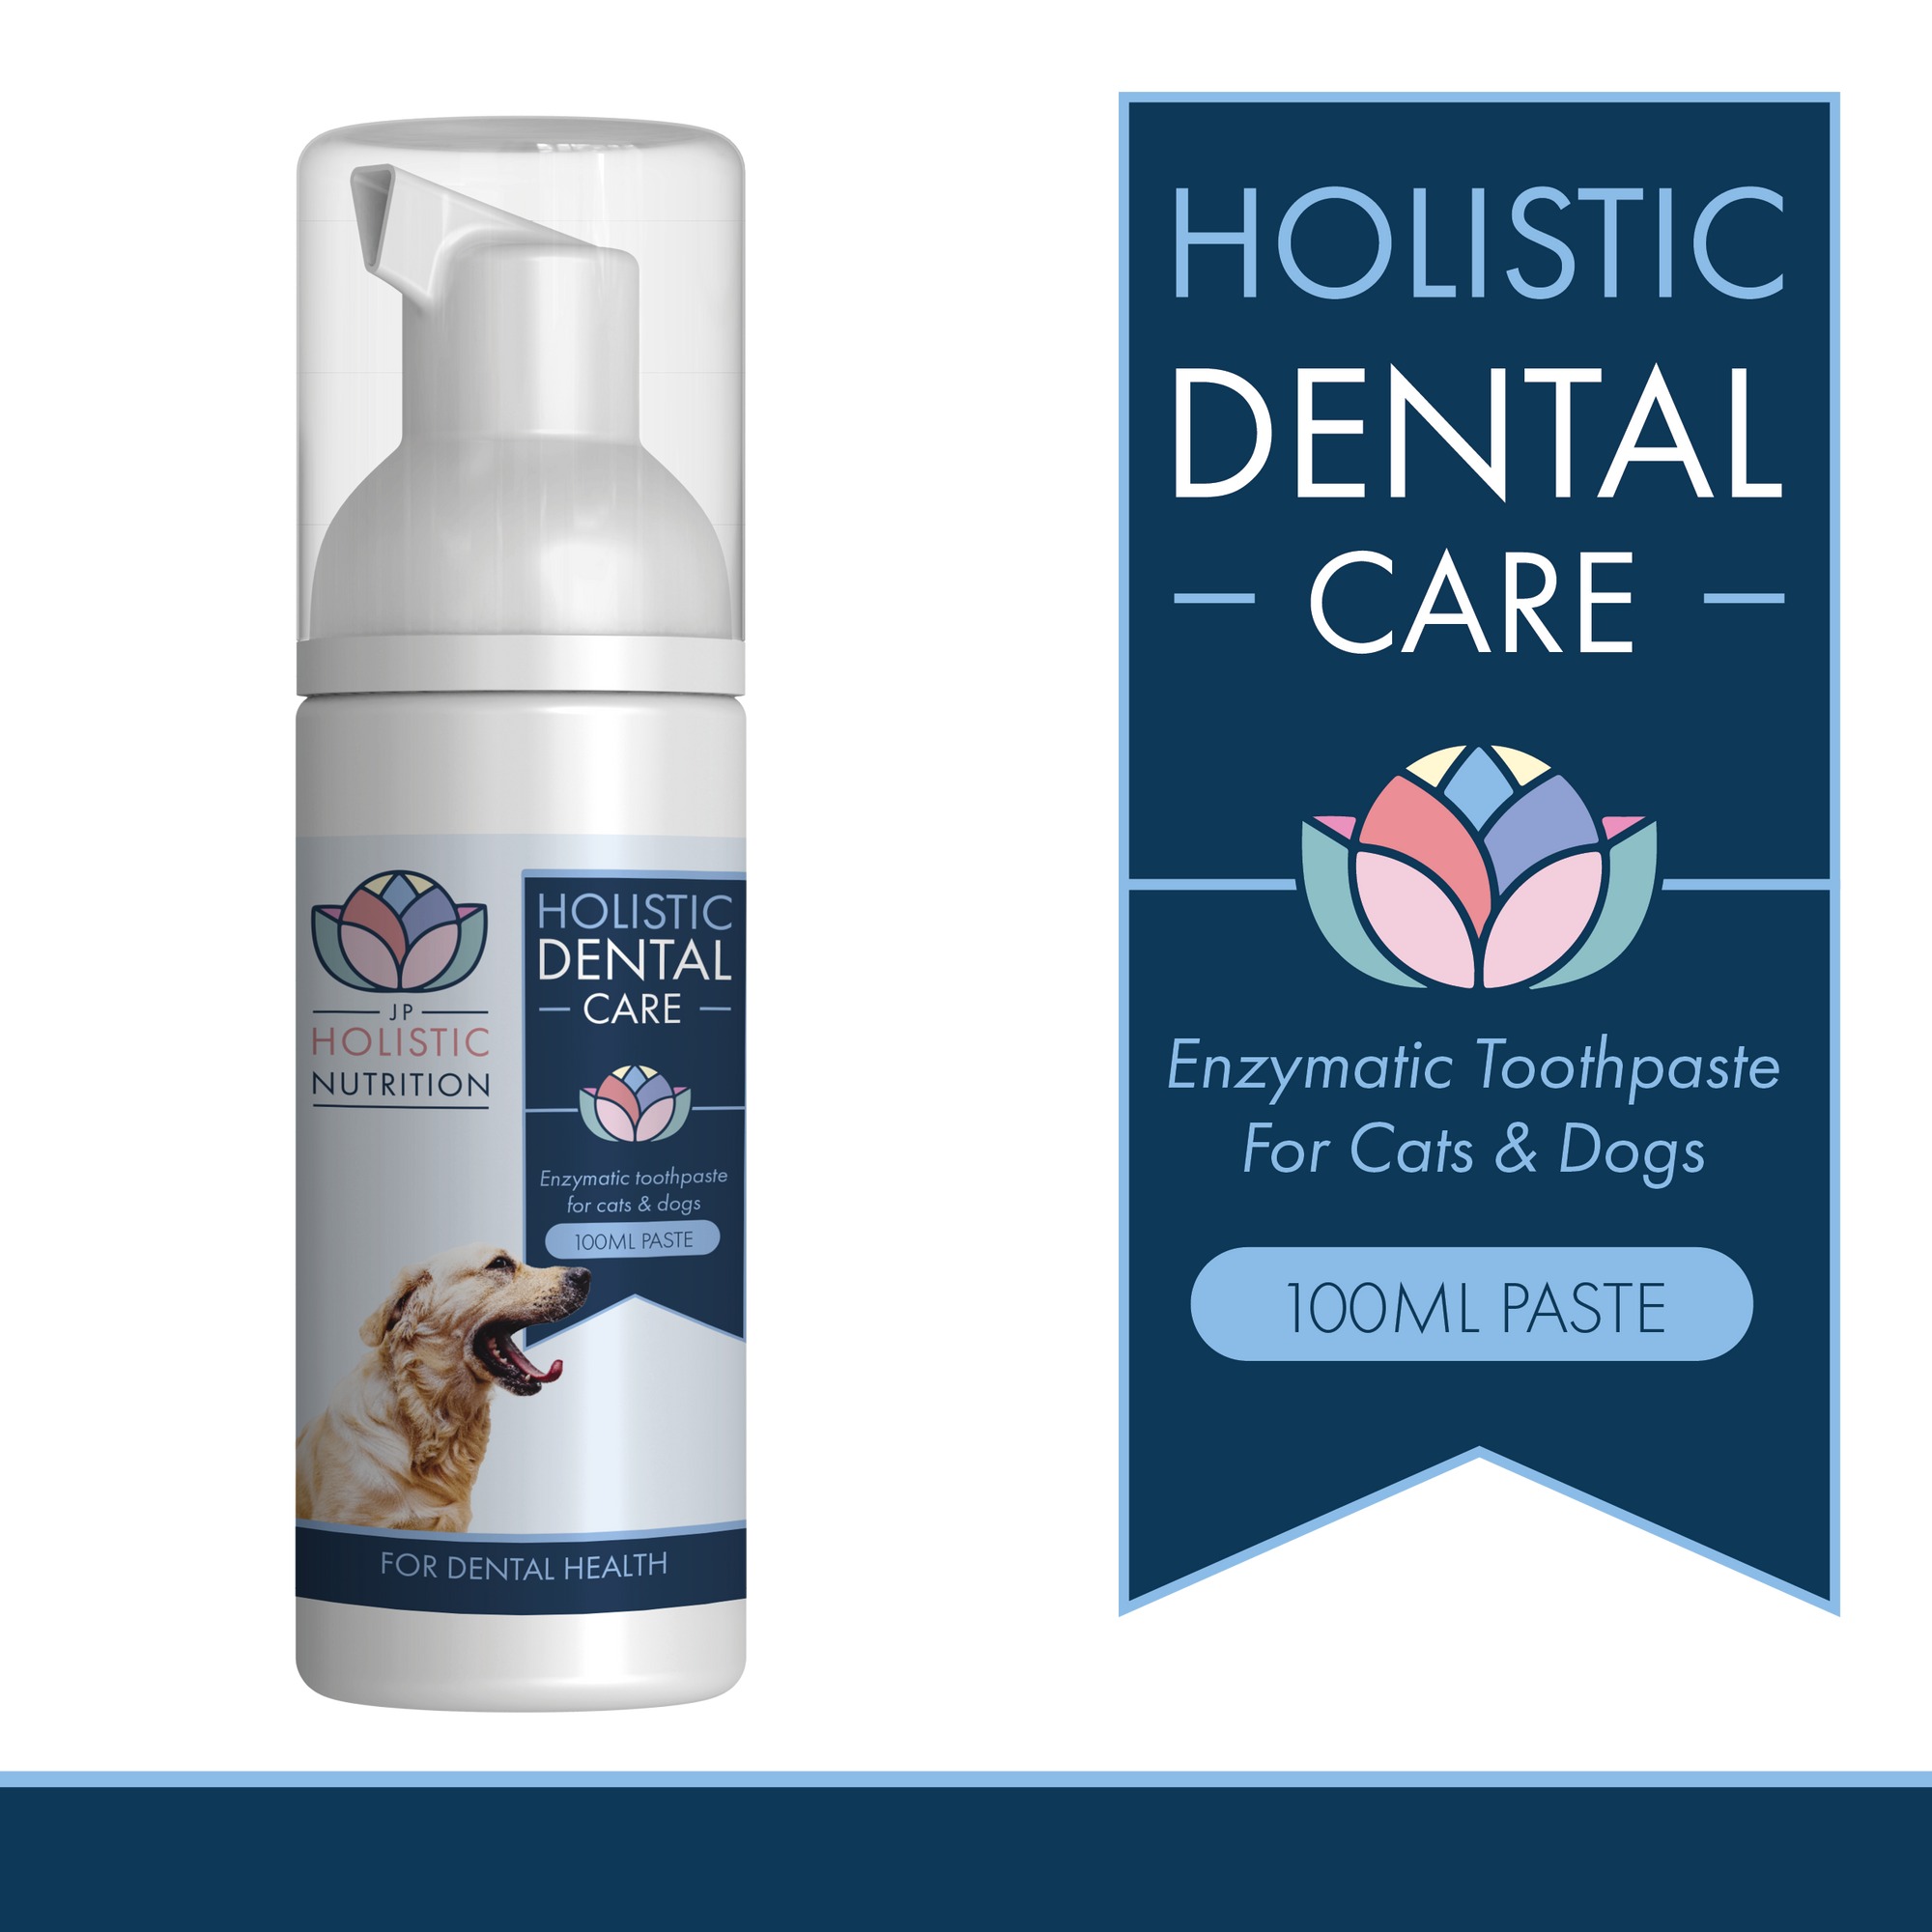 Natural Toothpaste for dogs and cats